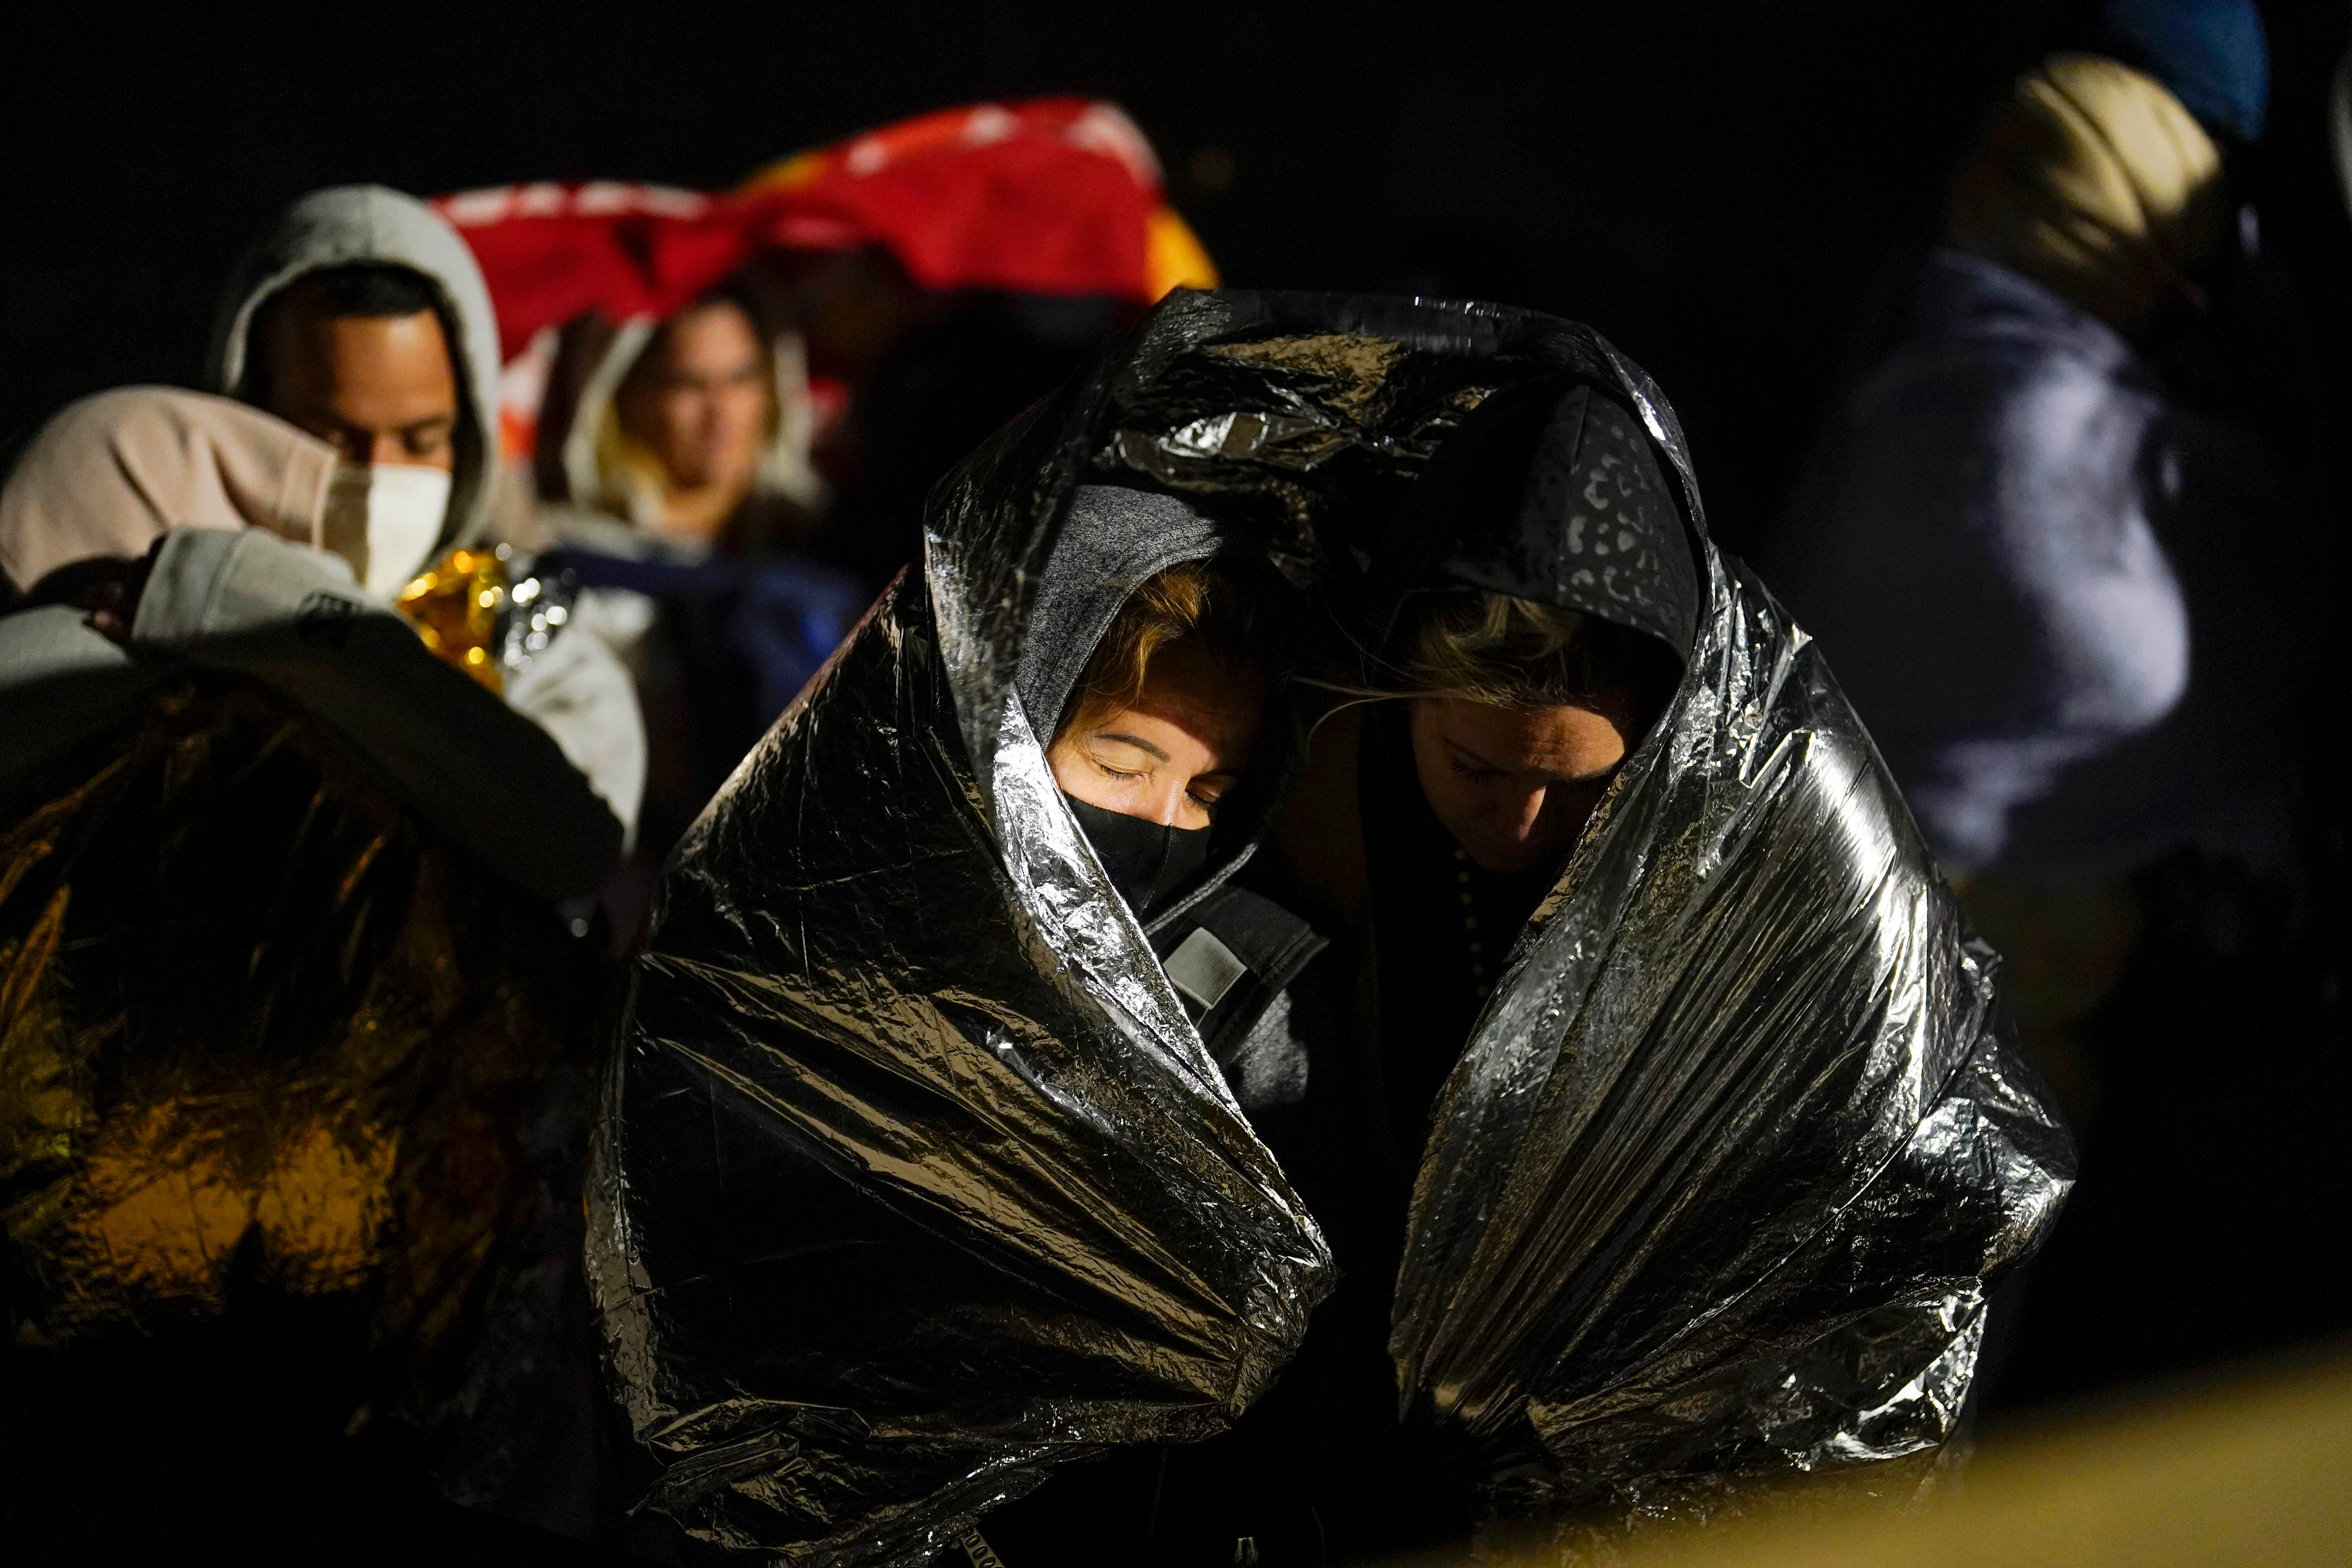 Two women from Cuba try to keep warm after crossing the border from Mexico and surrendering to authorities to apply for asylum on Nov. 3, 2022, near Yuma.